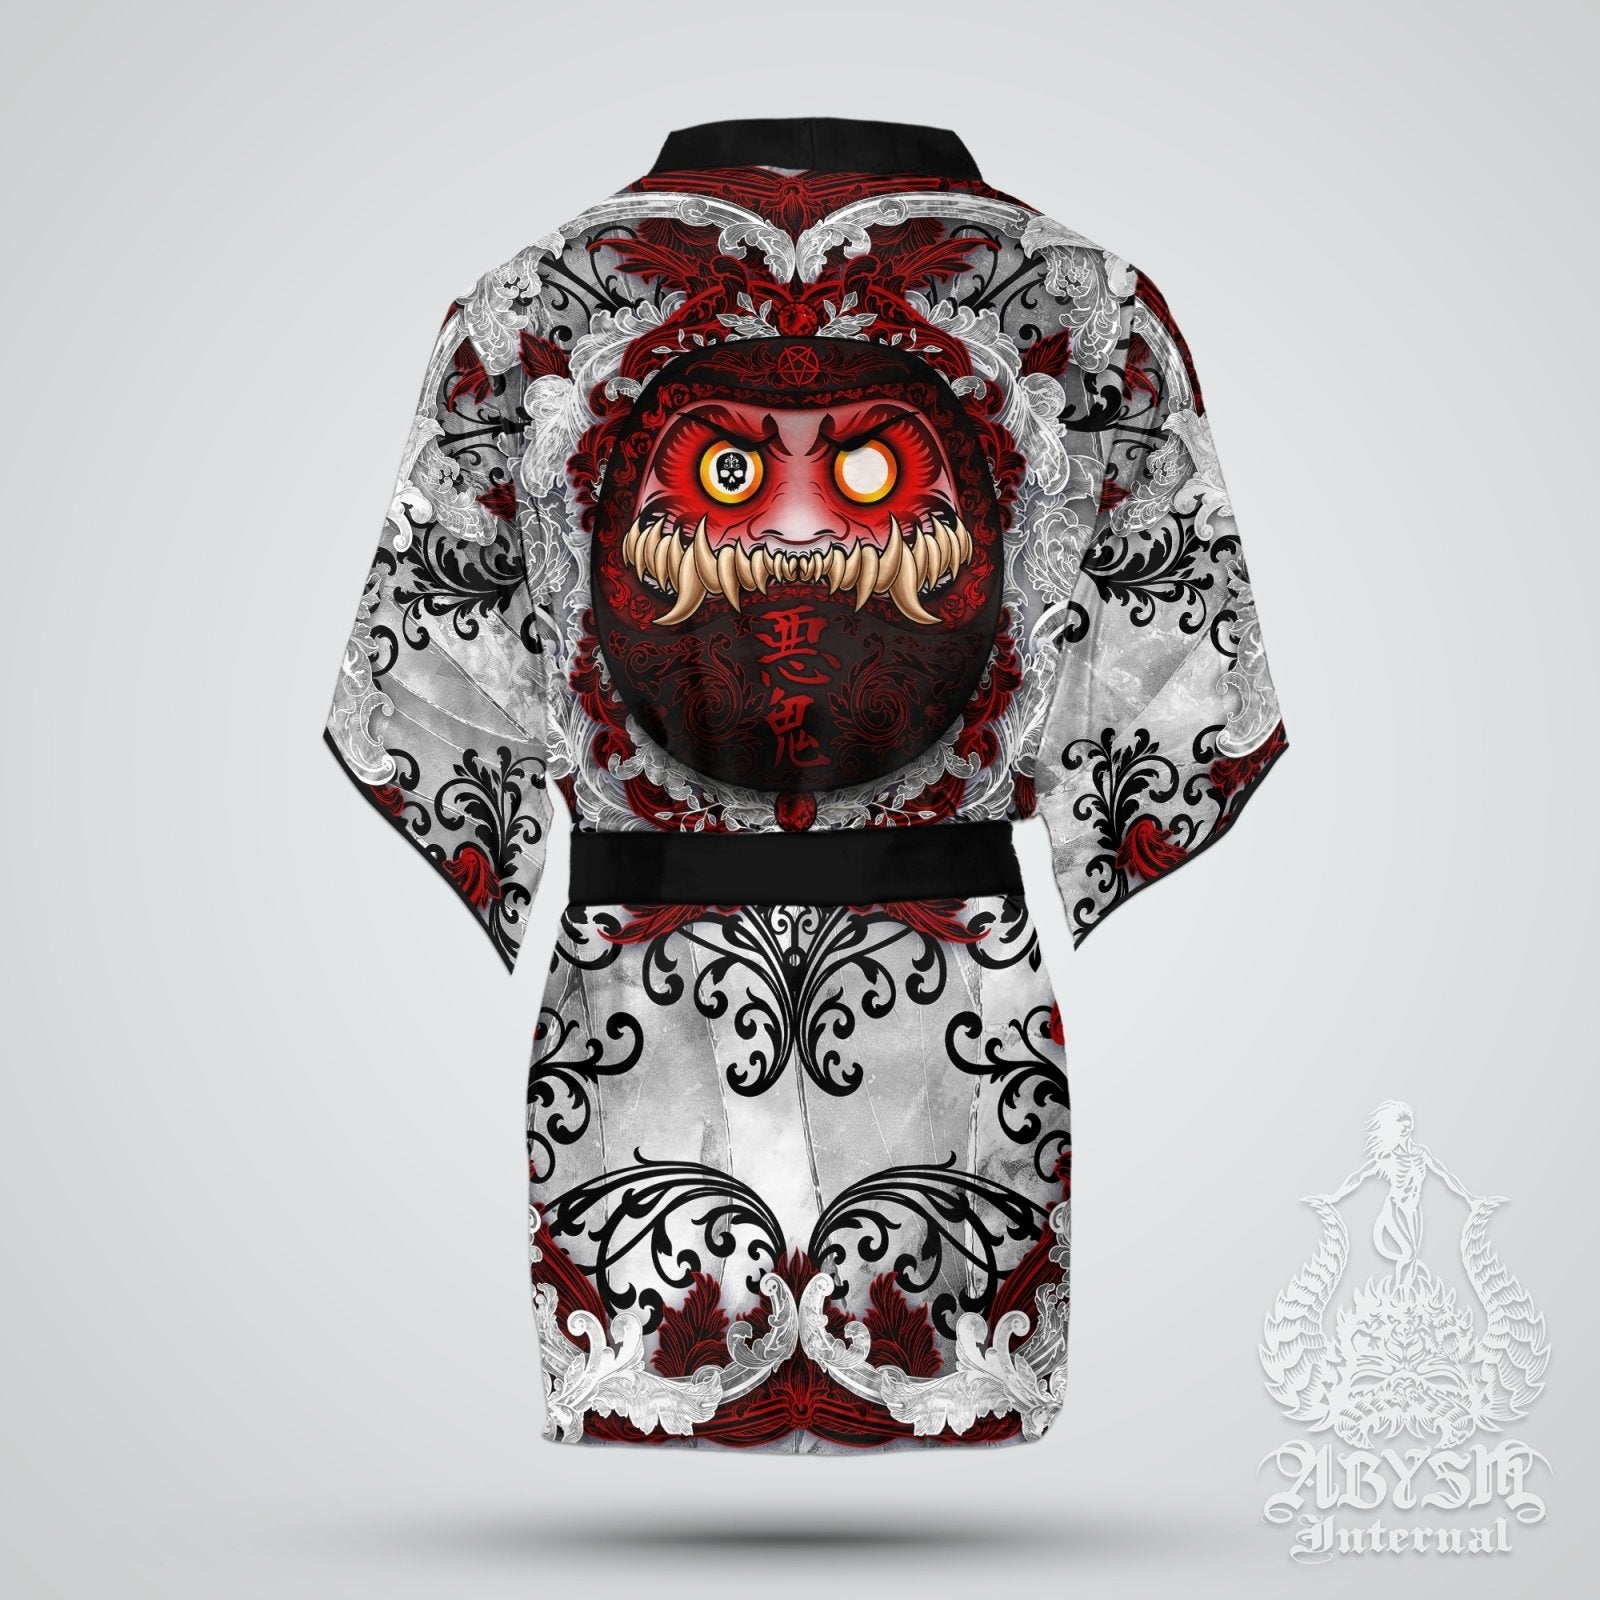 Daruma Cover Up, Beach Outfit, Party Kimono, Japanese Summer Festival Robe, Indie and Alternative Clothing, Unisex - Bloody White Goth - Abysm Internal